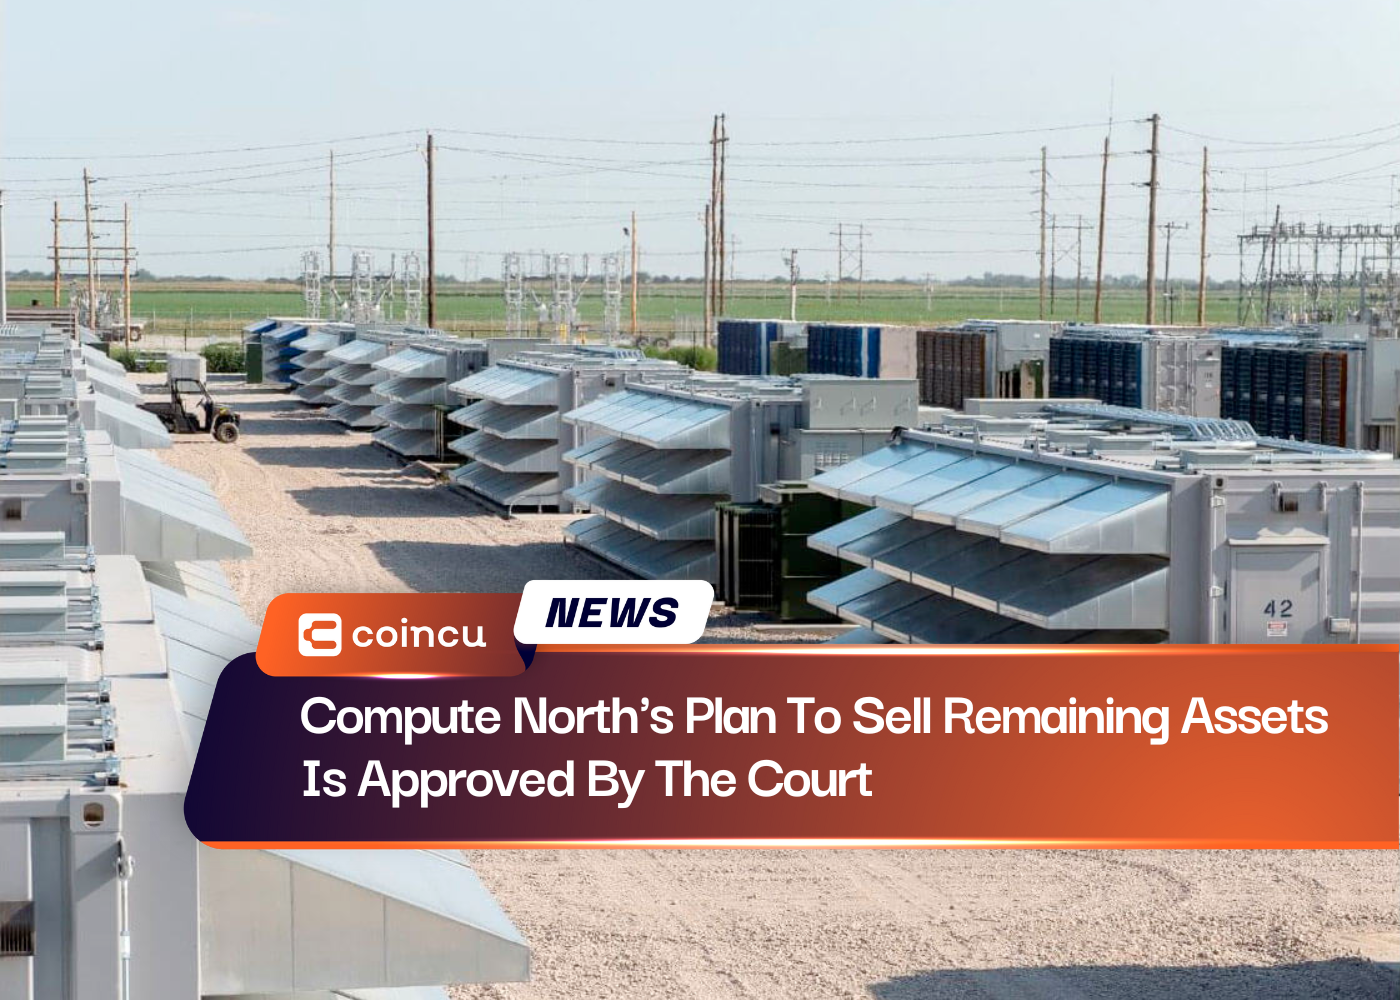 Compute North's Plan To Sell Remaining Assets Is Approved By The Court